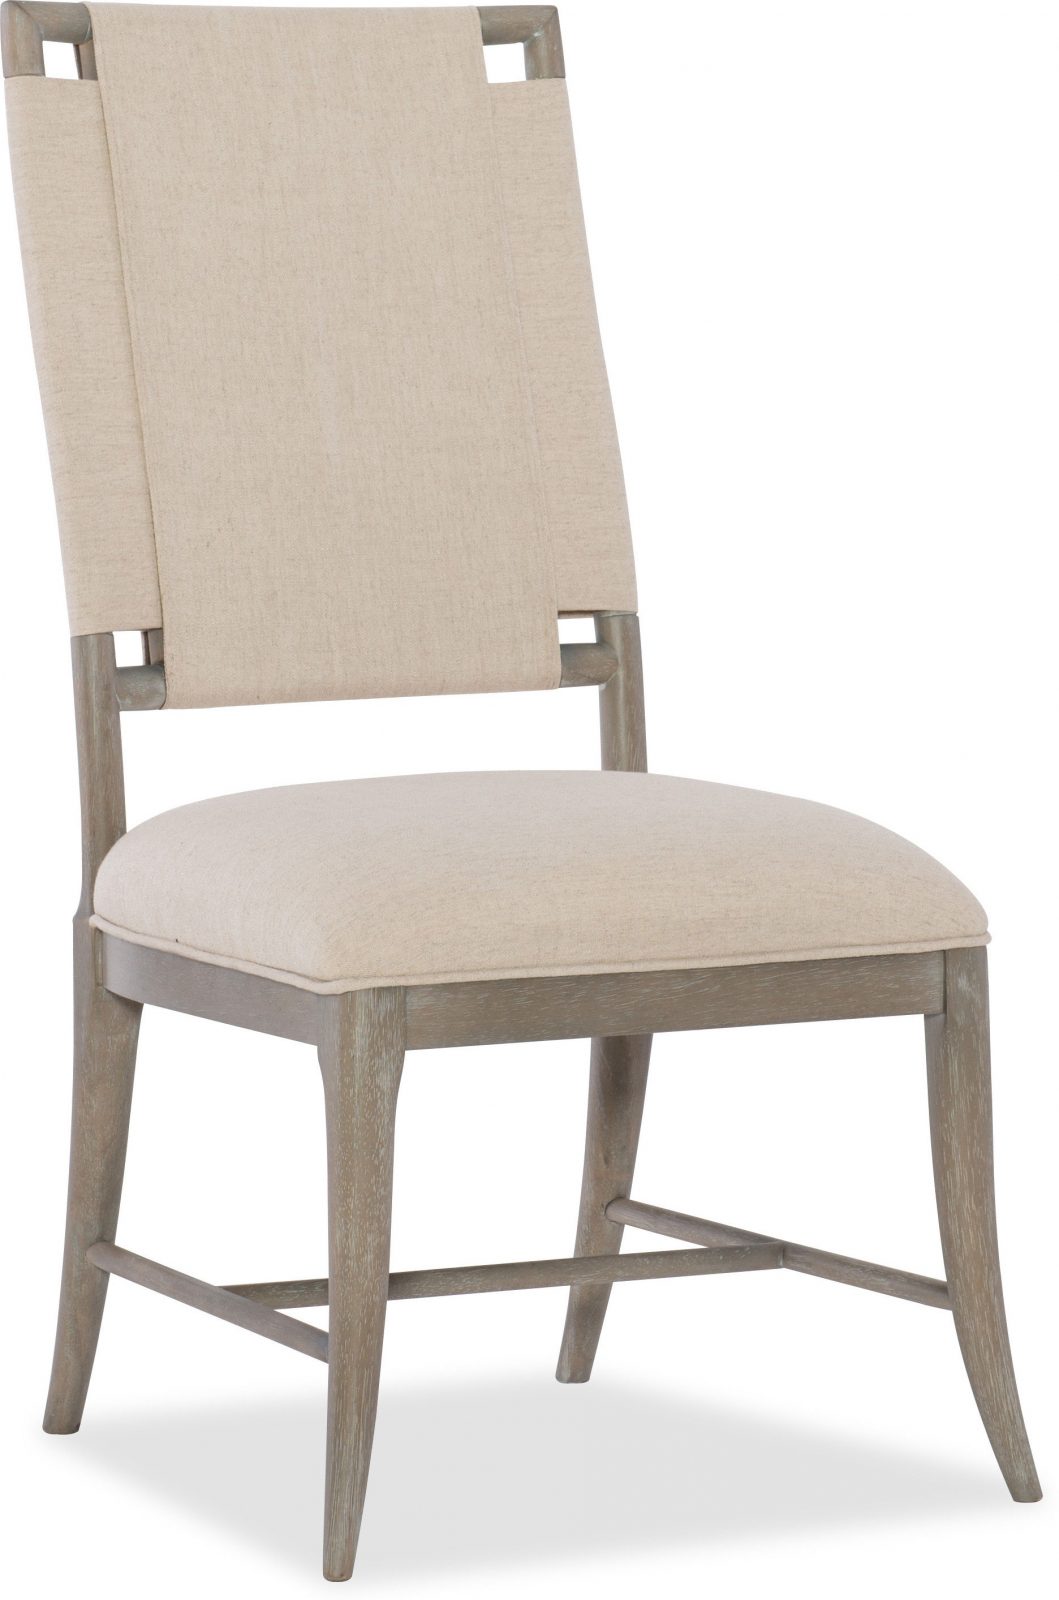 Affinity Upholstered side chair